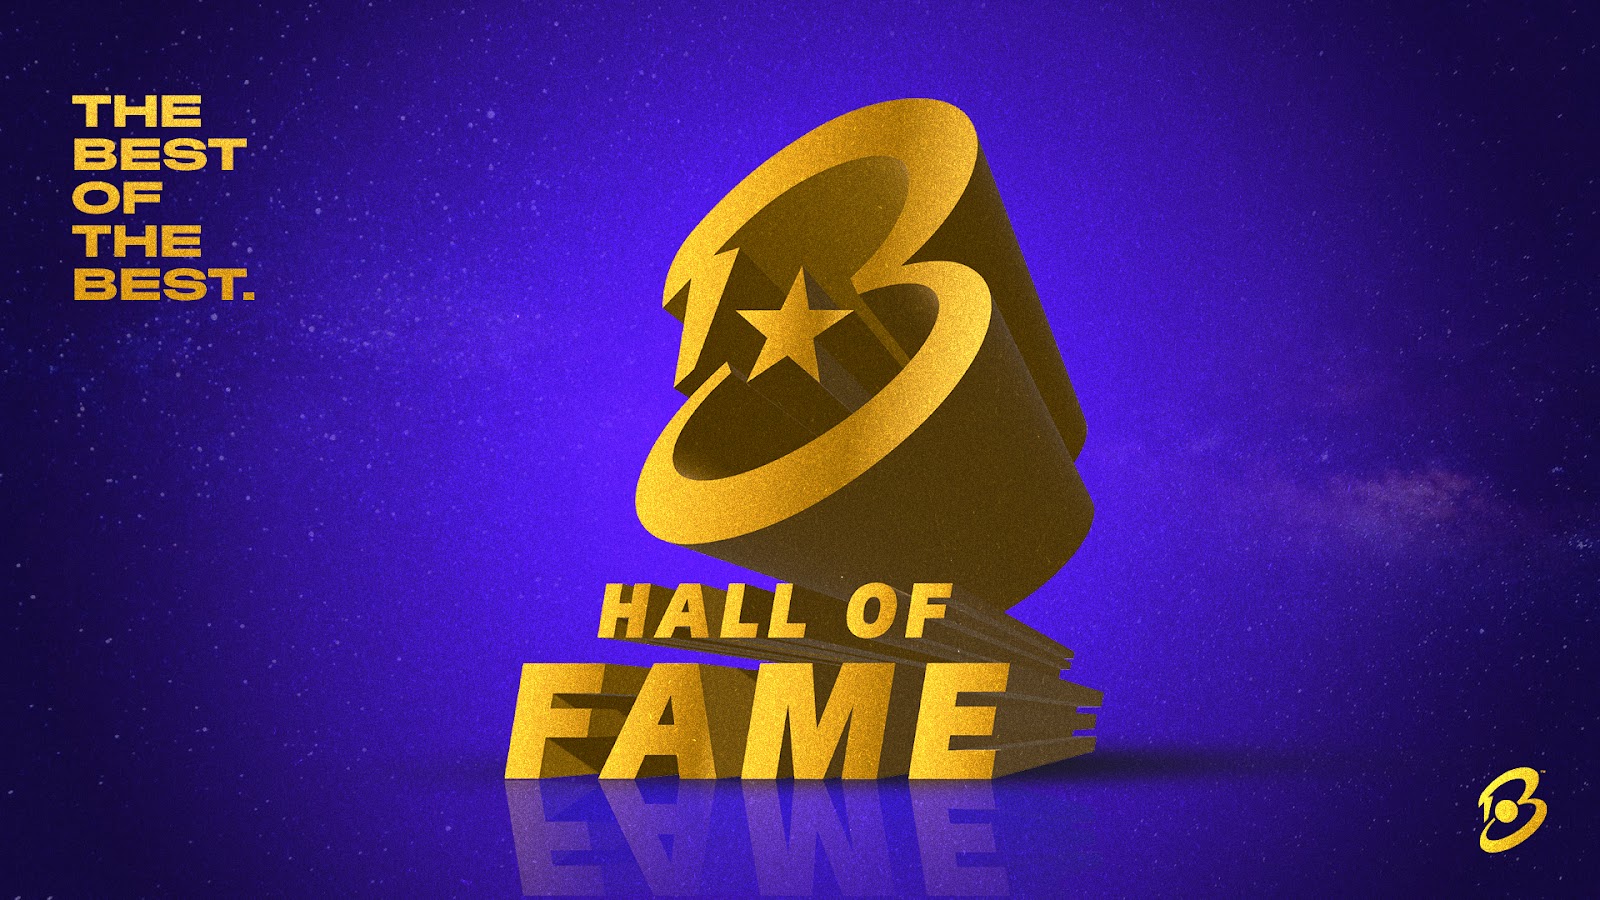 British Basketball League to introduce first-ever Hall of Fame to honour outstanding individuals who have made significant contributions to the League